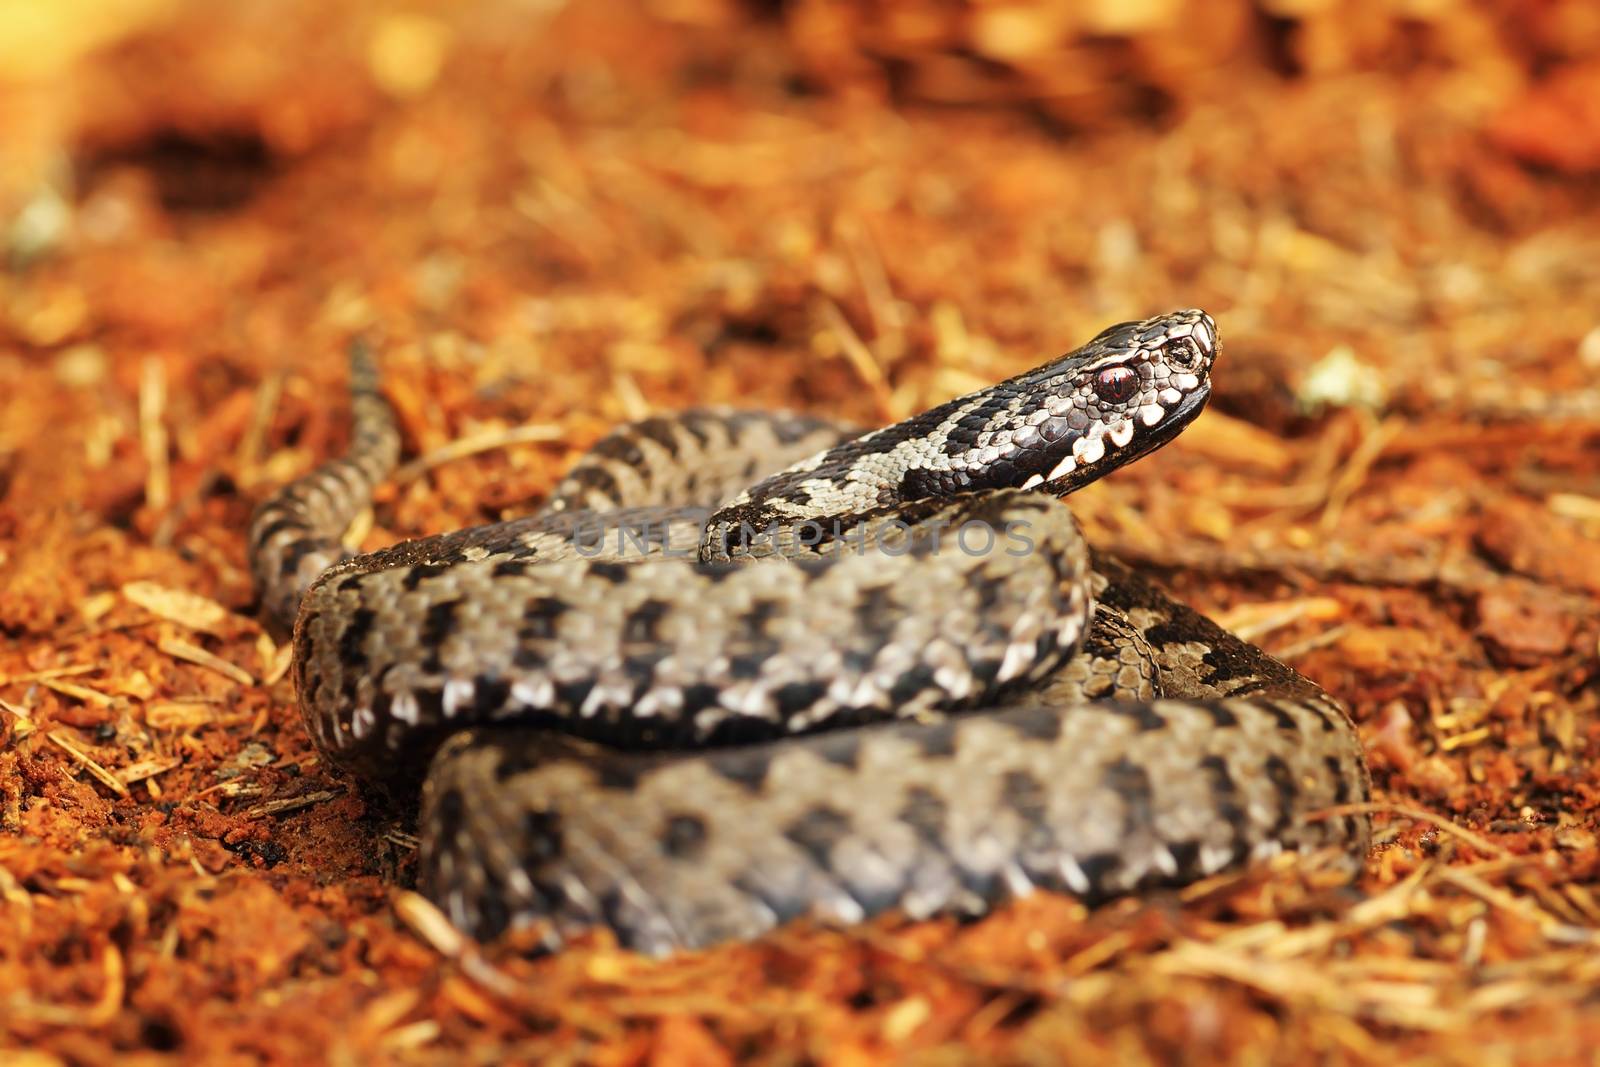 common viper standing on spruce forest ground ( Vipera berus )